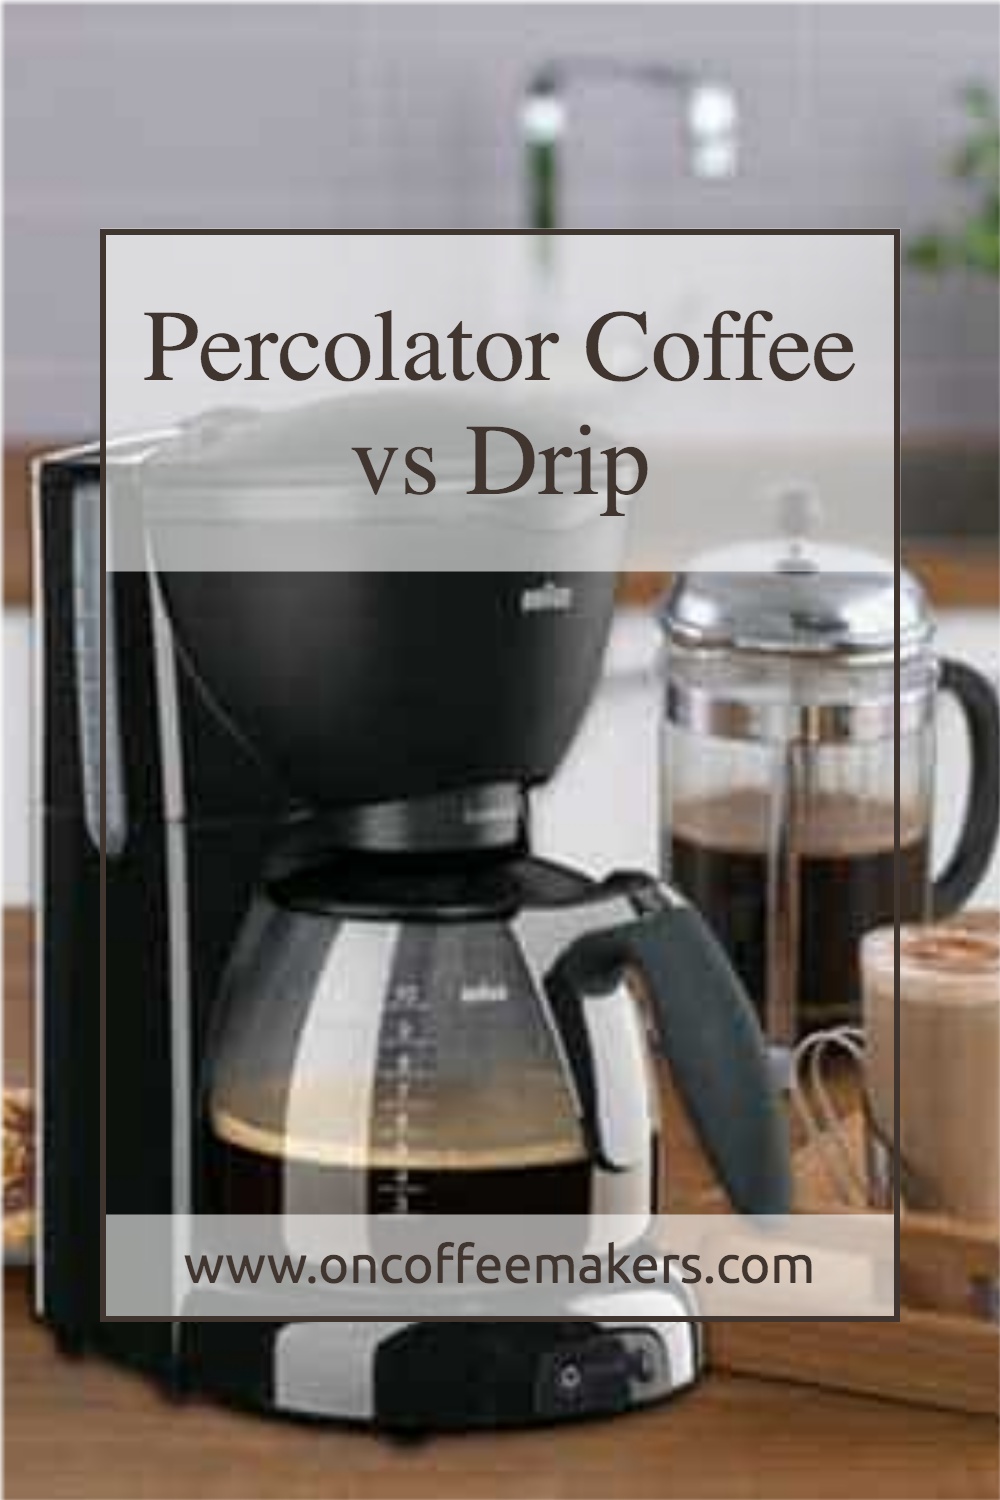 Drip or Percolated coffeewhich is best?